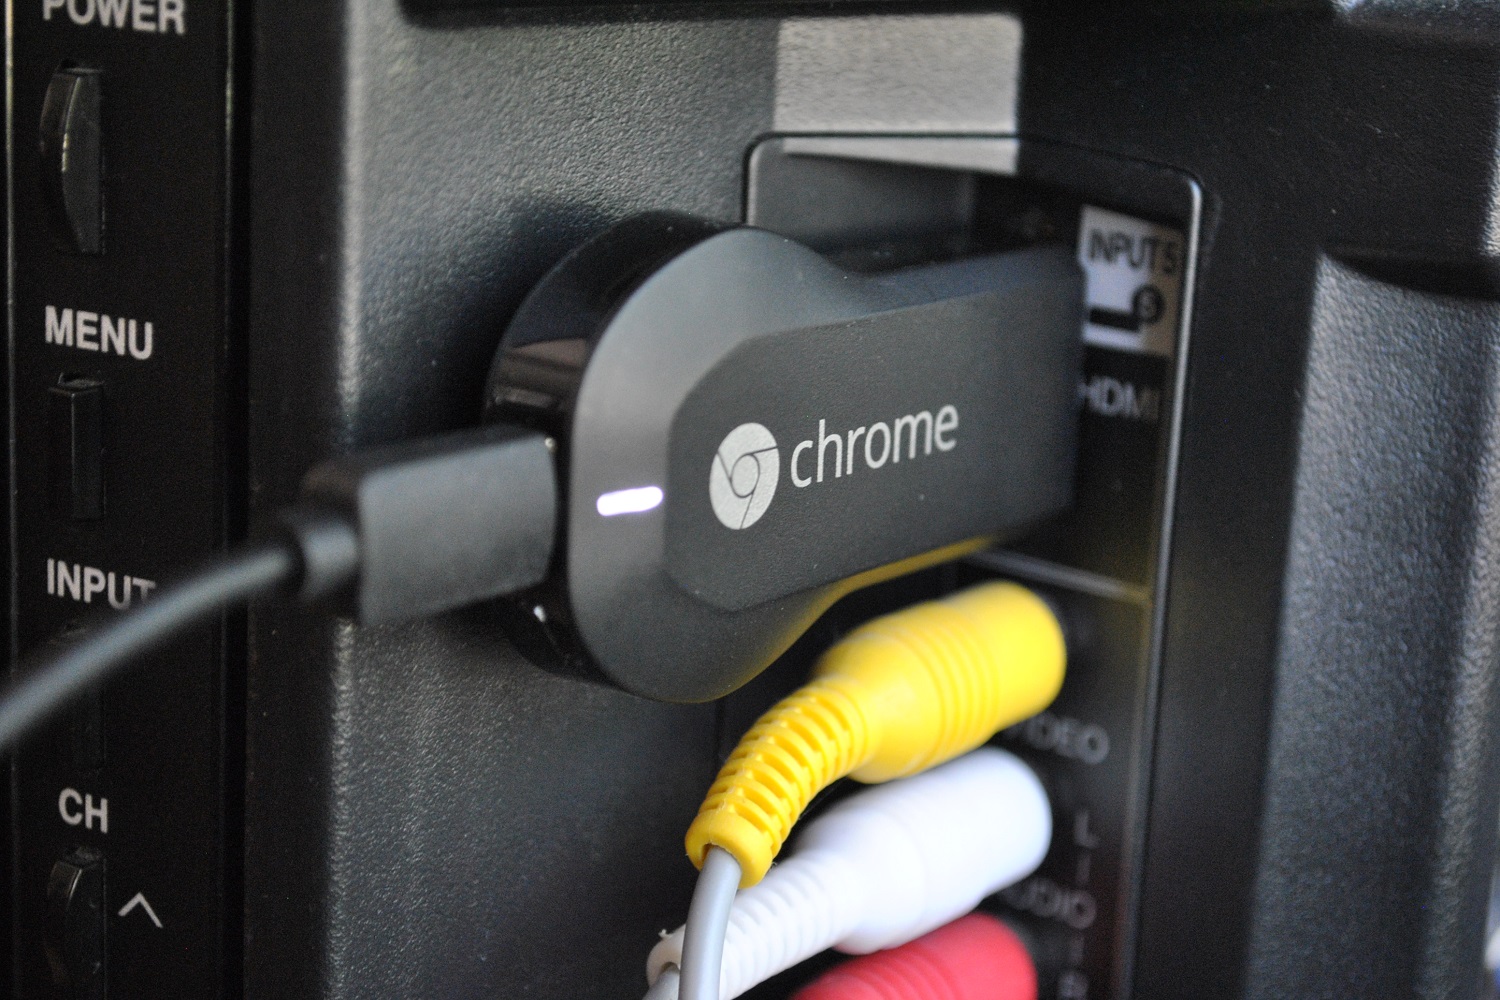 With the launch of a public developer software kit, more apps will be able to add support for Google's Chromecast.